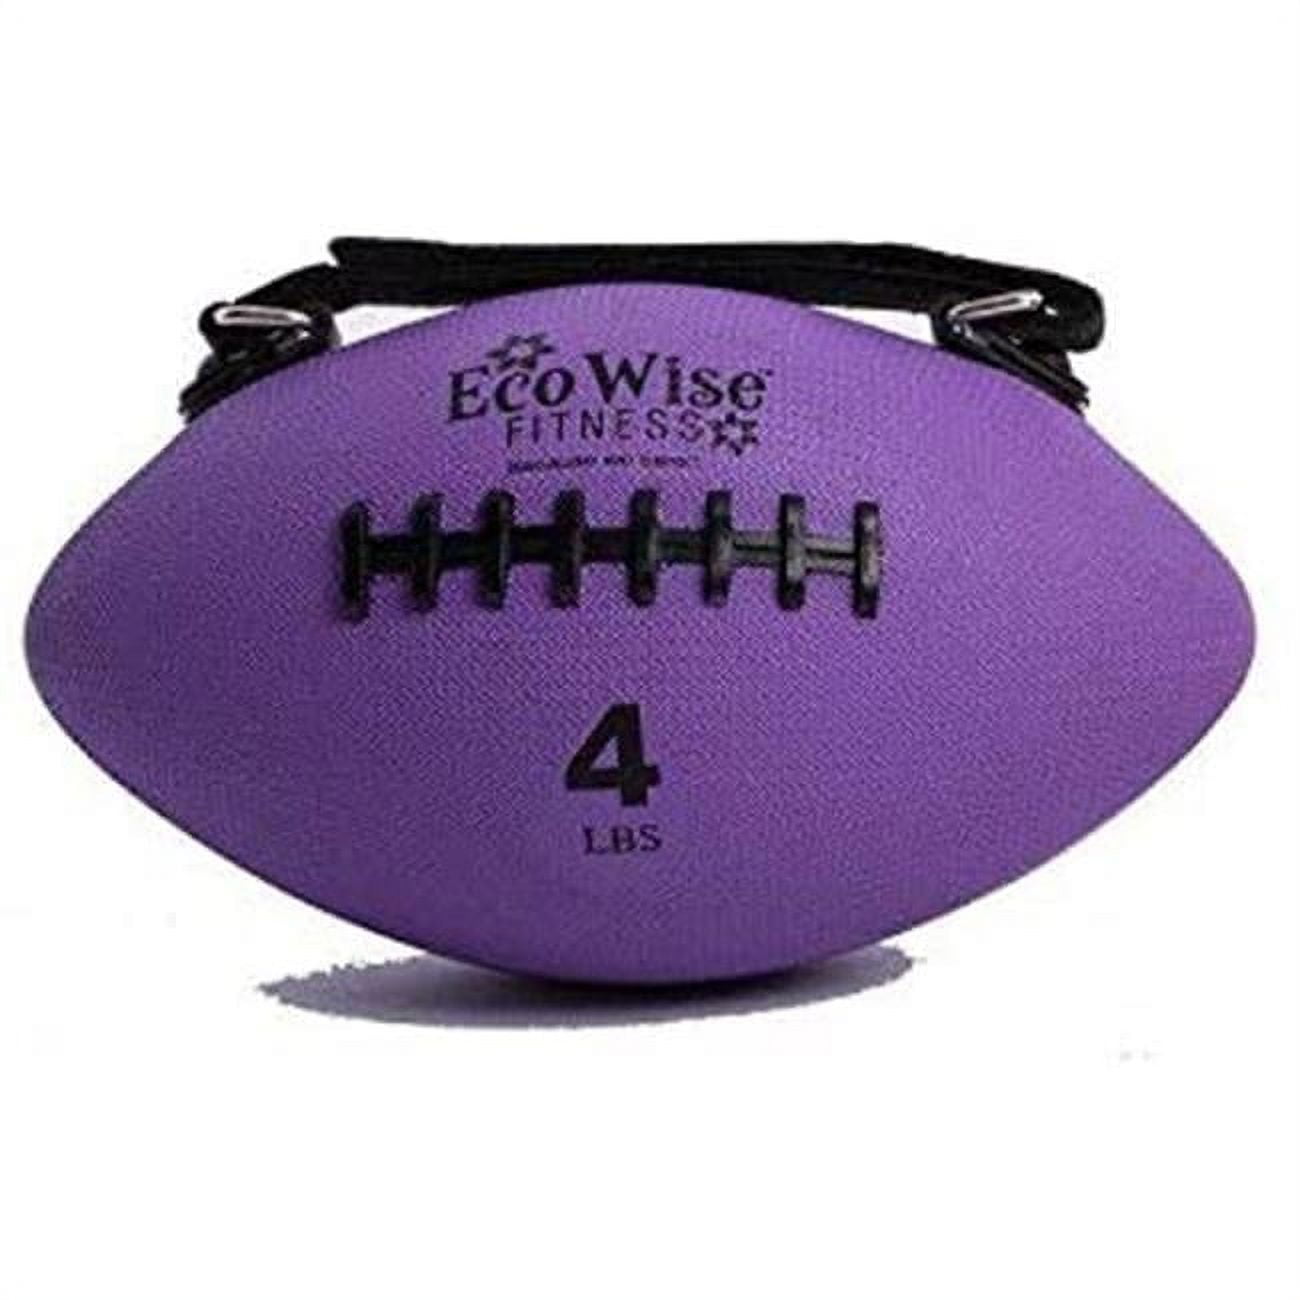 Picture of AGM Group 85704 4 lbs EcoWise Slim Olive Weight Ball, Lavender -7.25 in. dia.